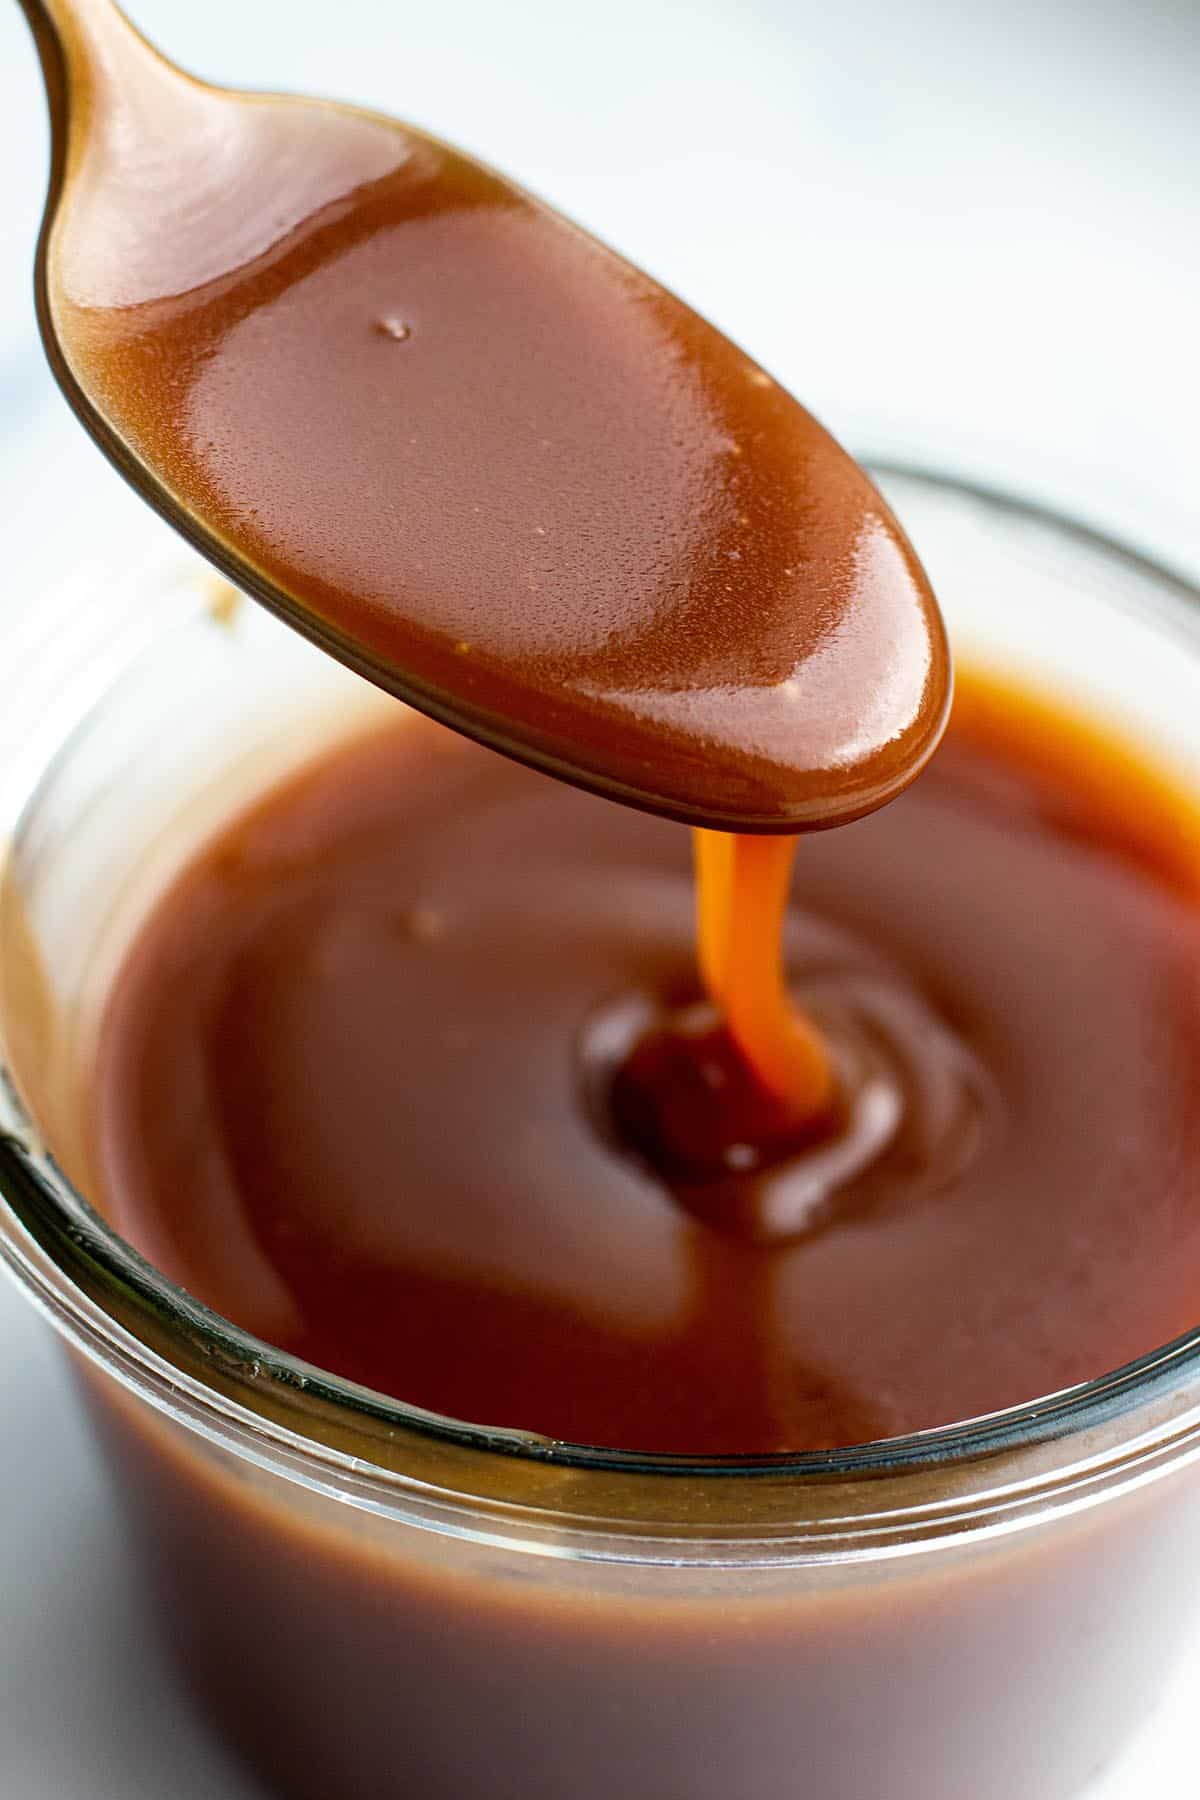 A weck jar with a caramel sauce and a spoon scooping some out.